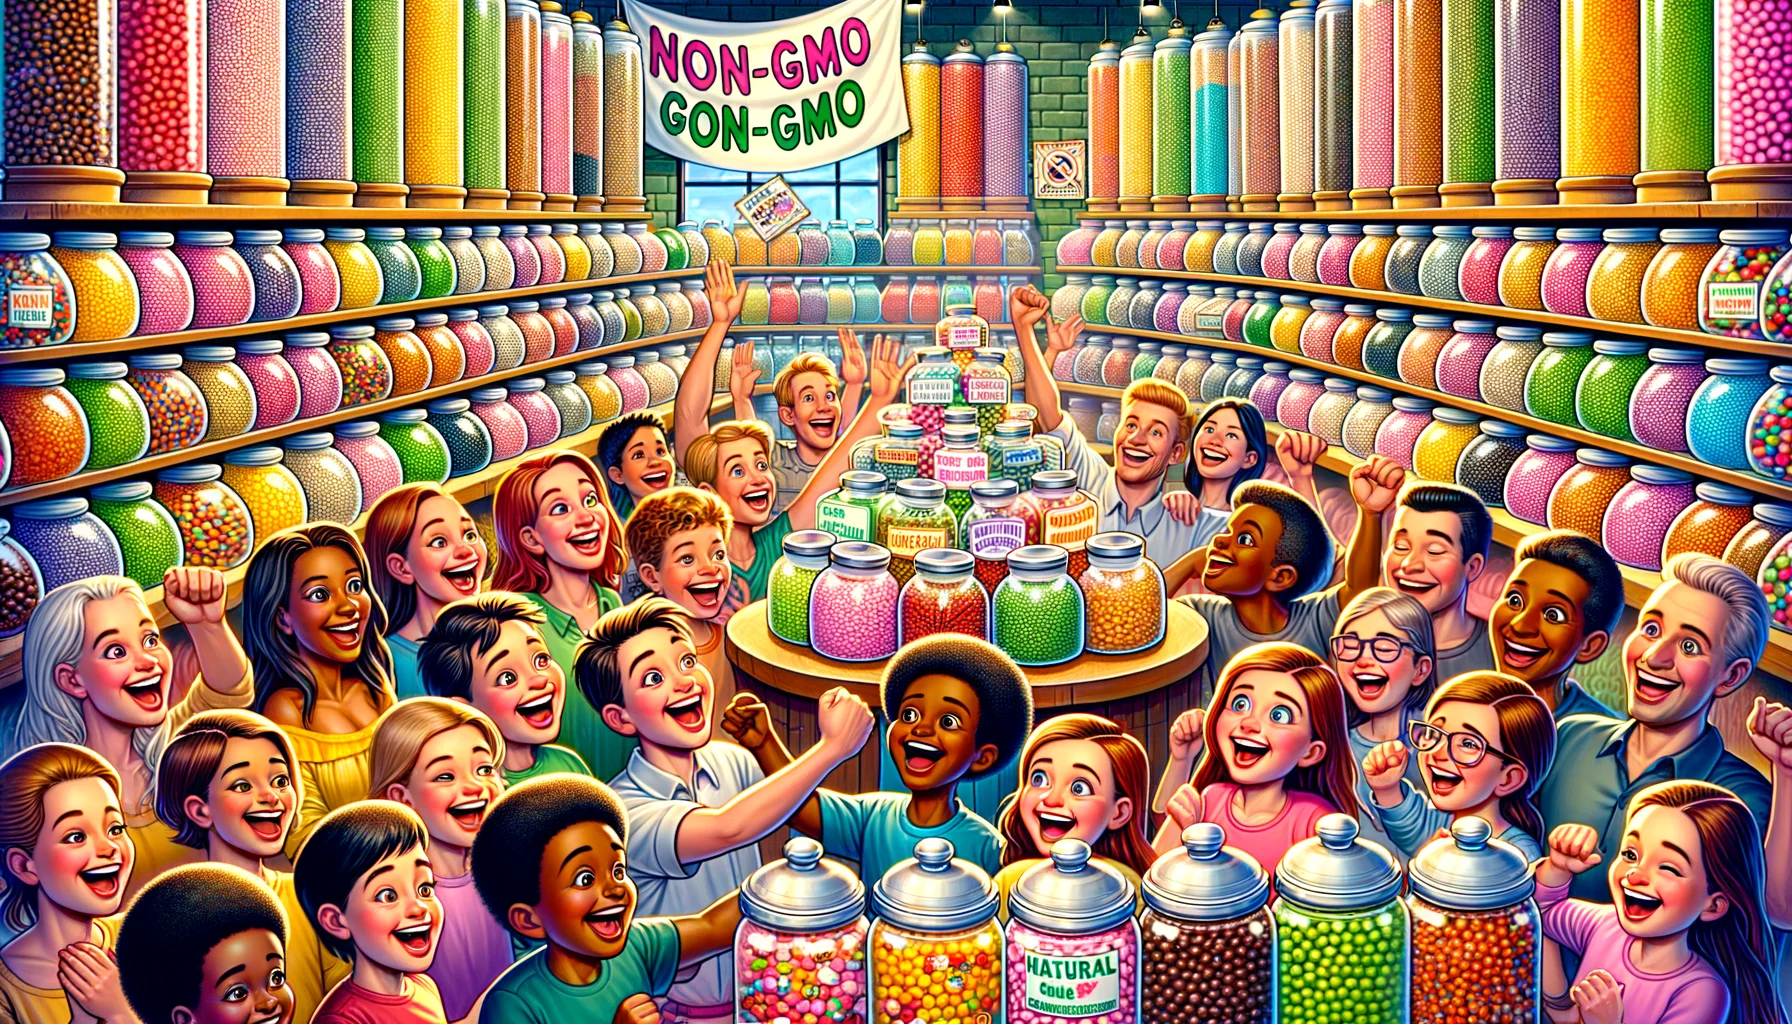 A colorful image of a perfect scenario promoting Non-GMO Candy Choices. Picture a large candy store filled with numerous jars of all-natural candies. The candies should be vibrantly colored, and they vary in shape, size, and texture. Each candy jar comes with a label confirming that it is non-GMO. To evoke humor, imagine some candies with funny faces smiling back at you. A crowd of excited children and adults of different genders and descents, such as Caucasian, Hispanic, Black, Middle-Eastern, and South Asian, are happily exploring the candy choices, laughing and expressing joy as they select their favorites candies. The atmosphere is joyful, and everyone is having a good time. The background is full of playful designs emphasizing the non-GMO message.